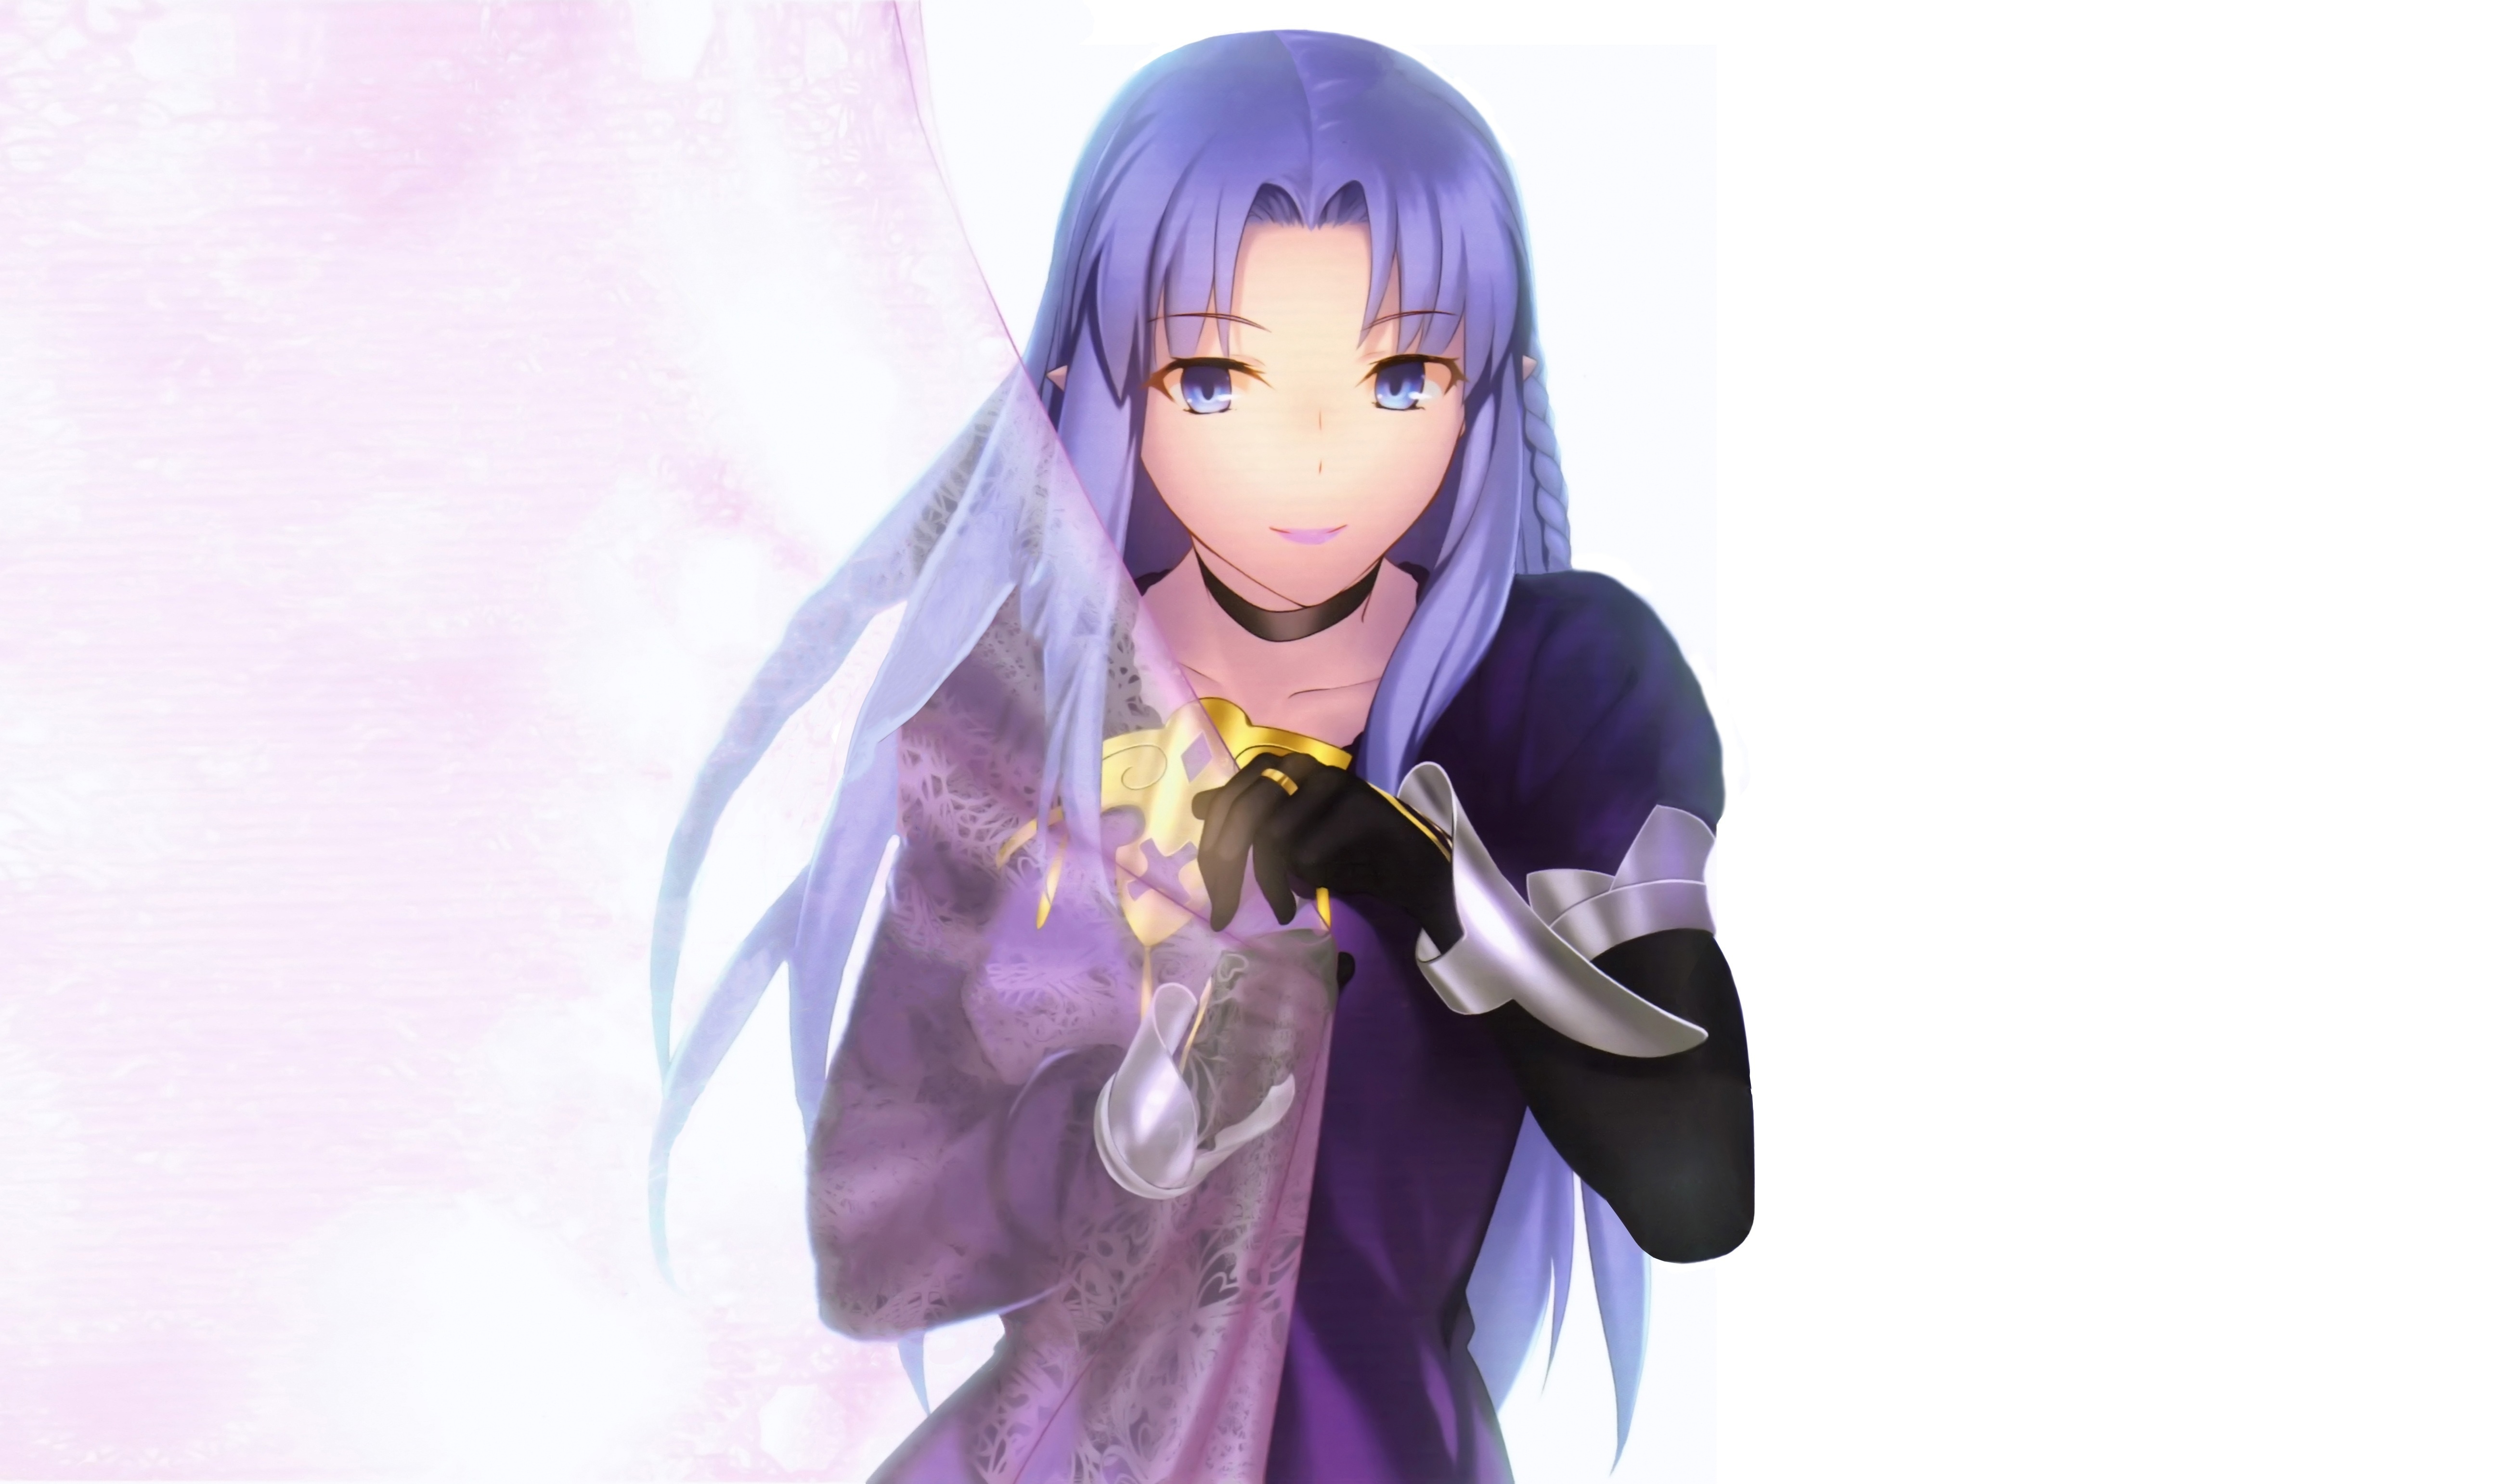 Caster (Fate/Stay Night) - wide 4